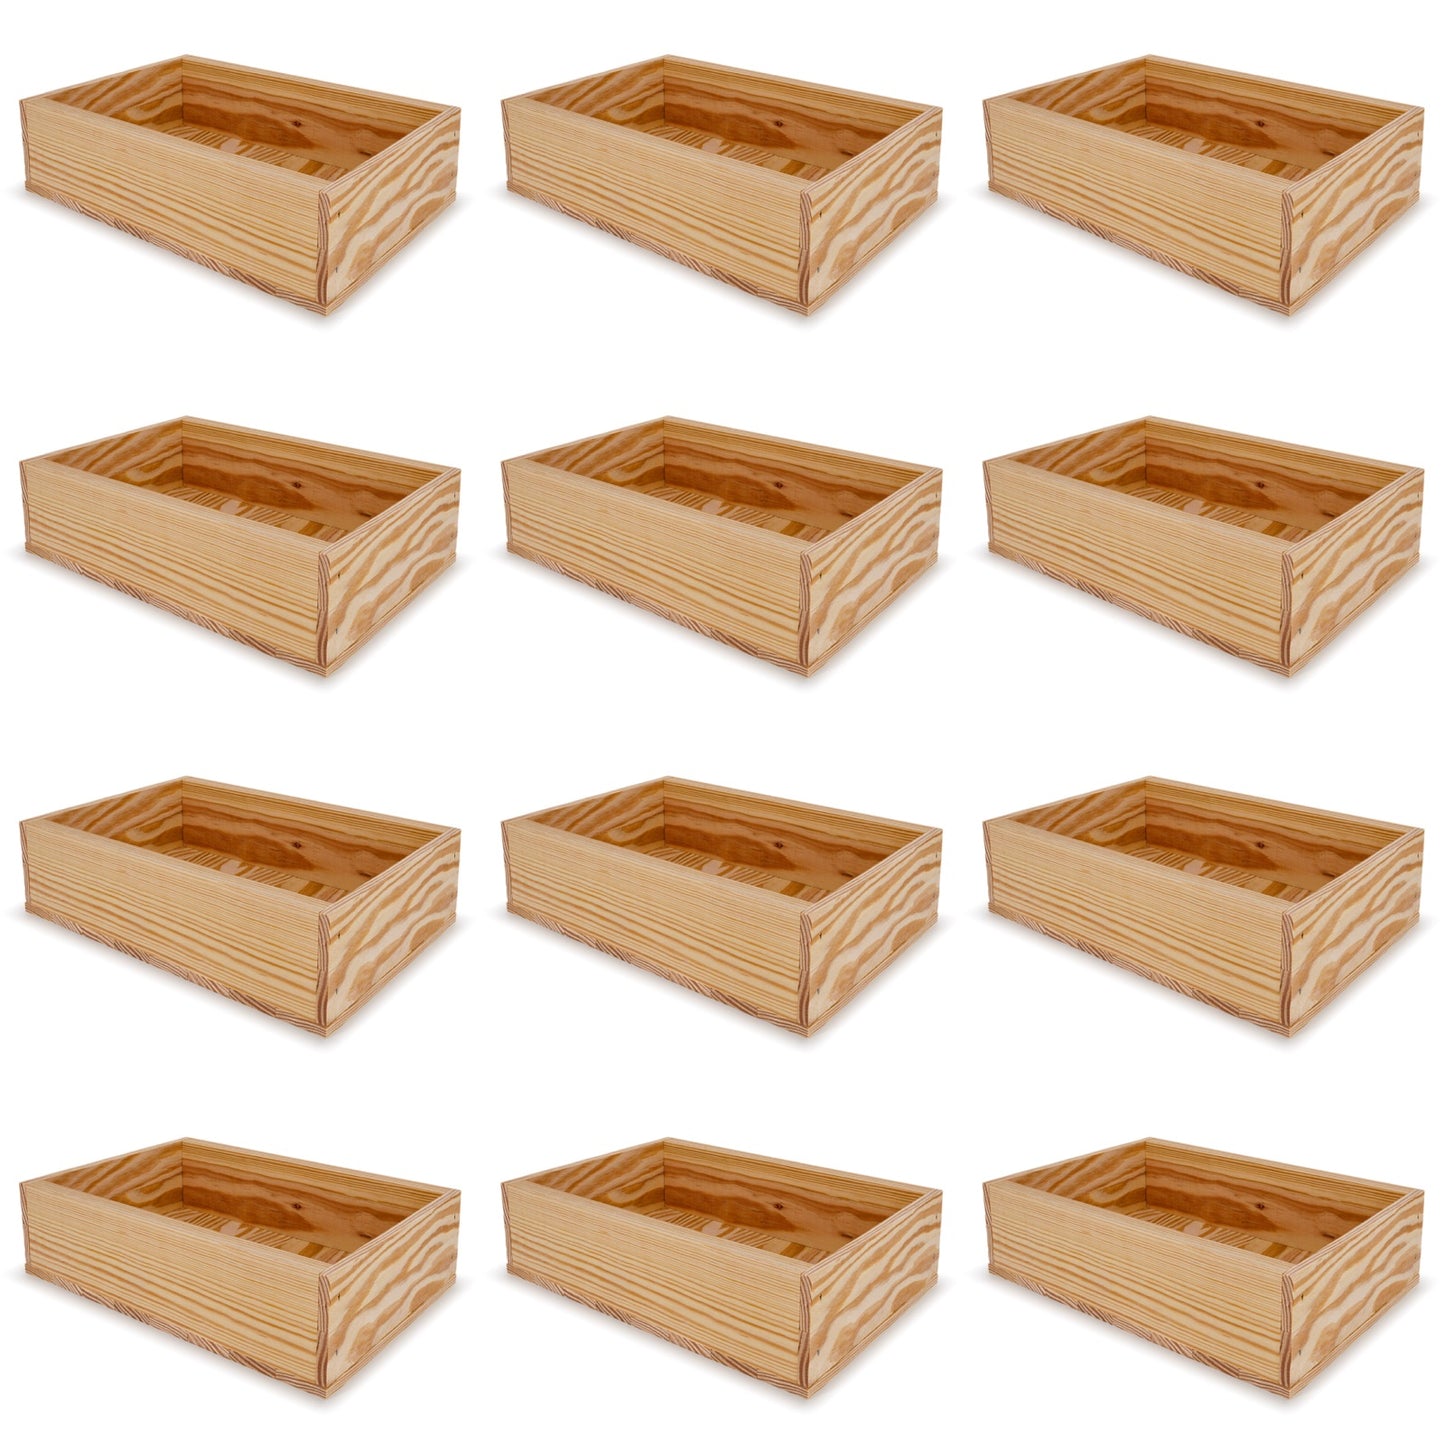 12 Small wooden crates 8x13.25x3.5